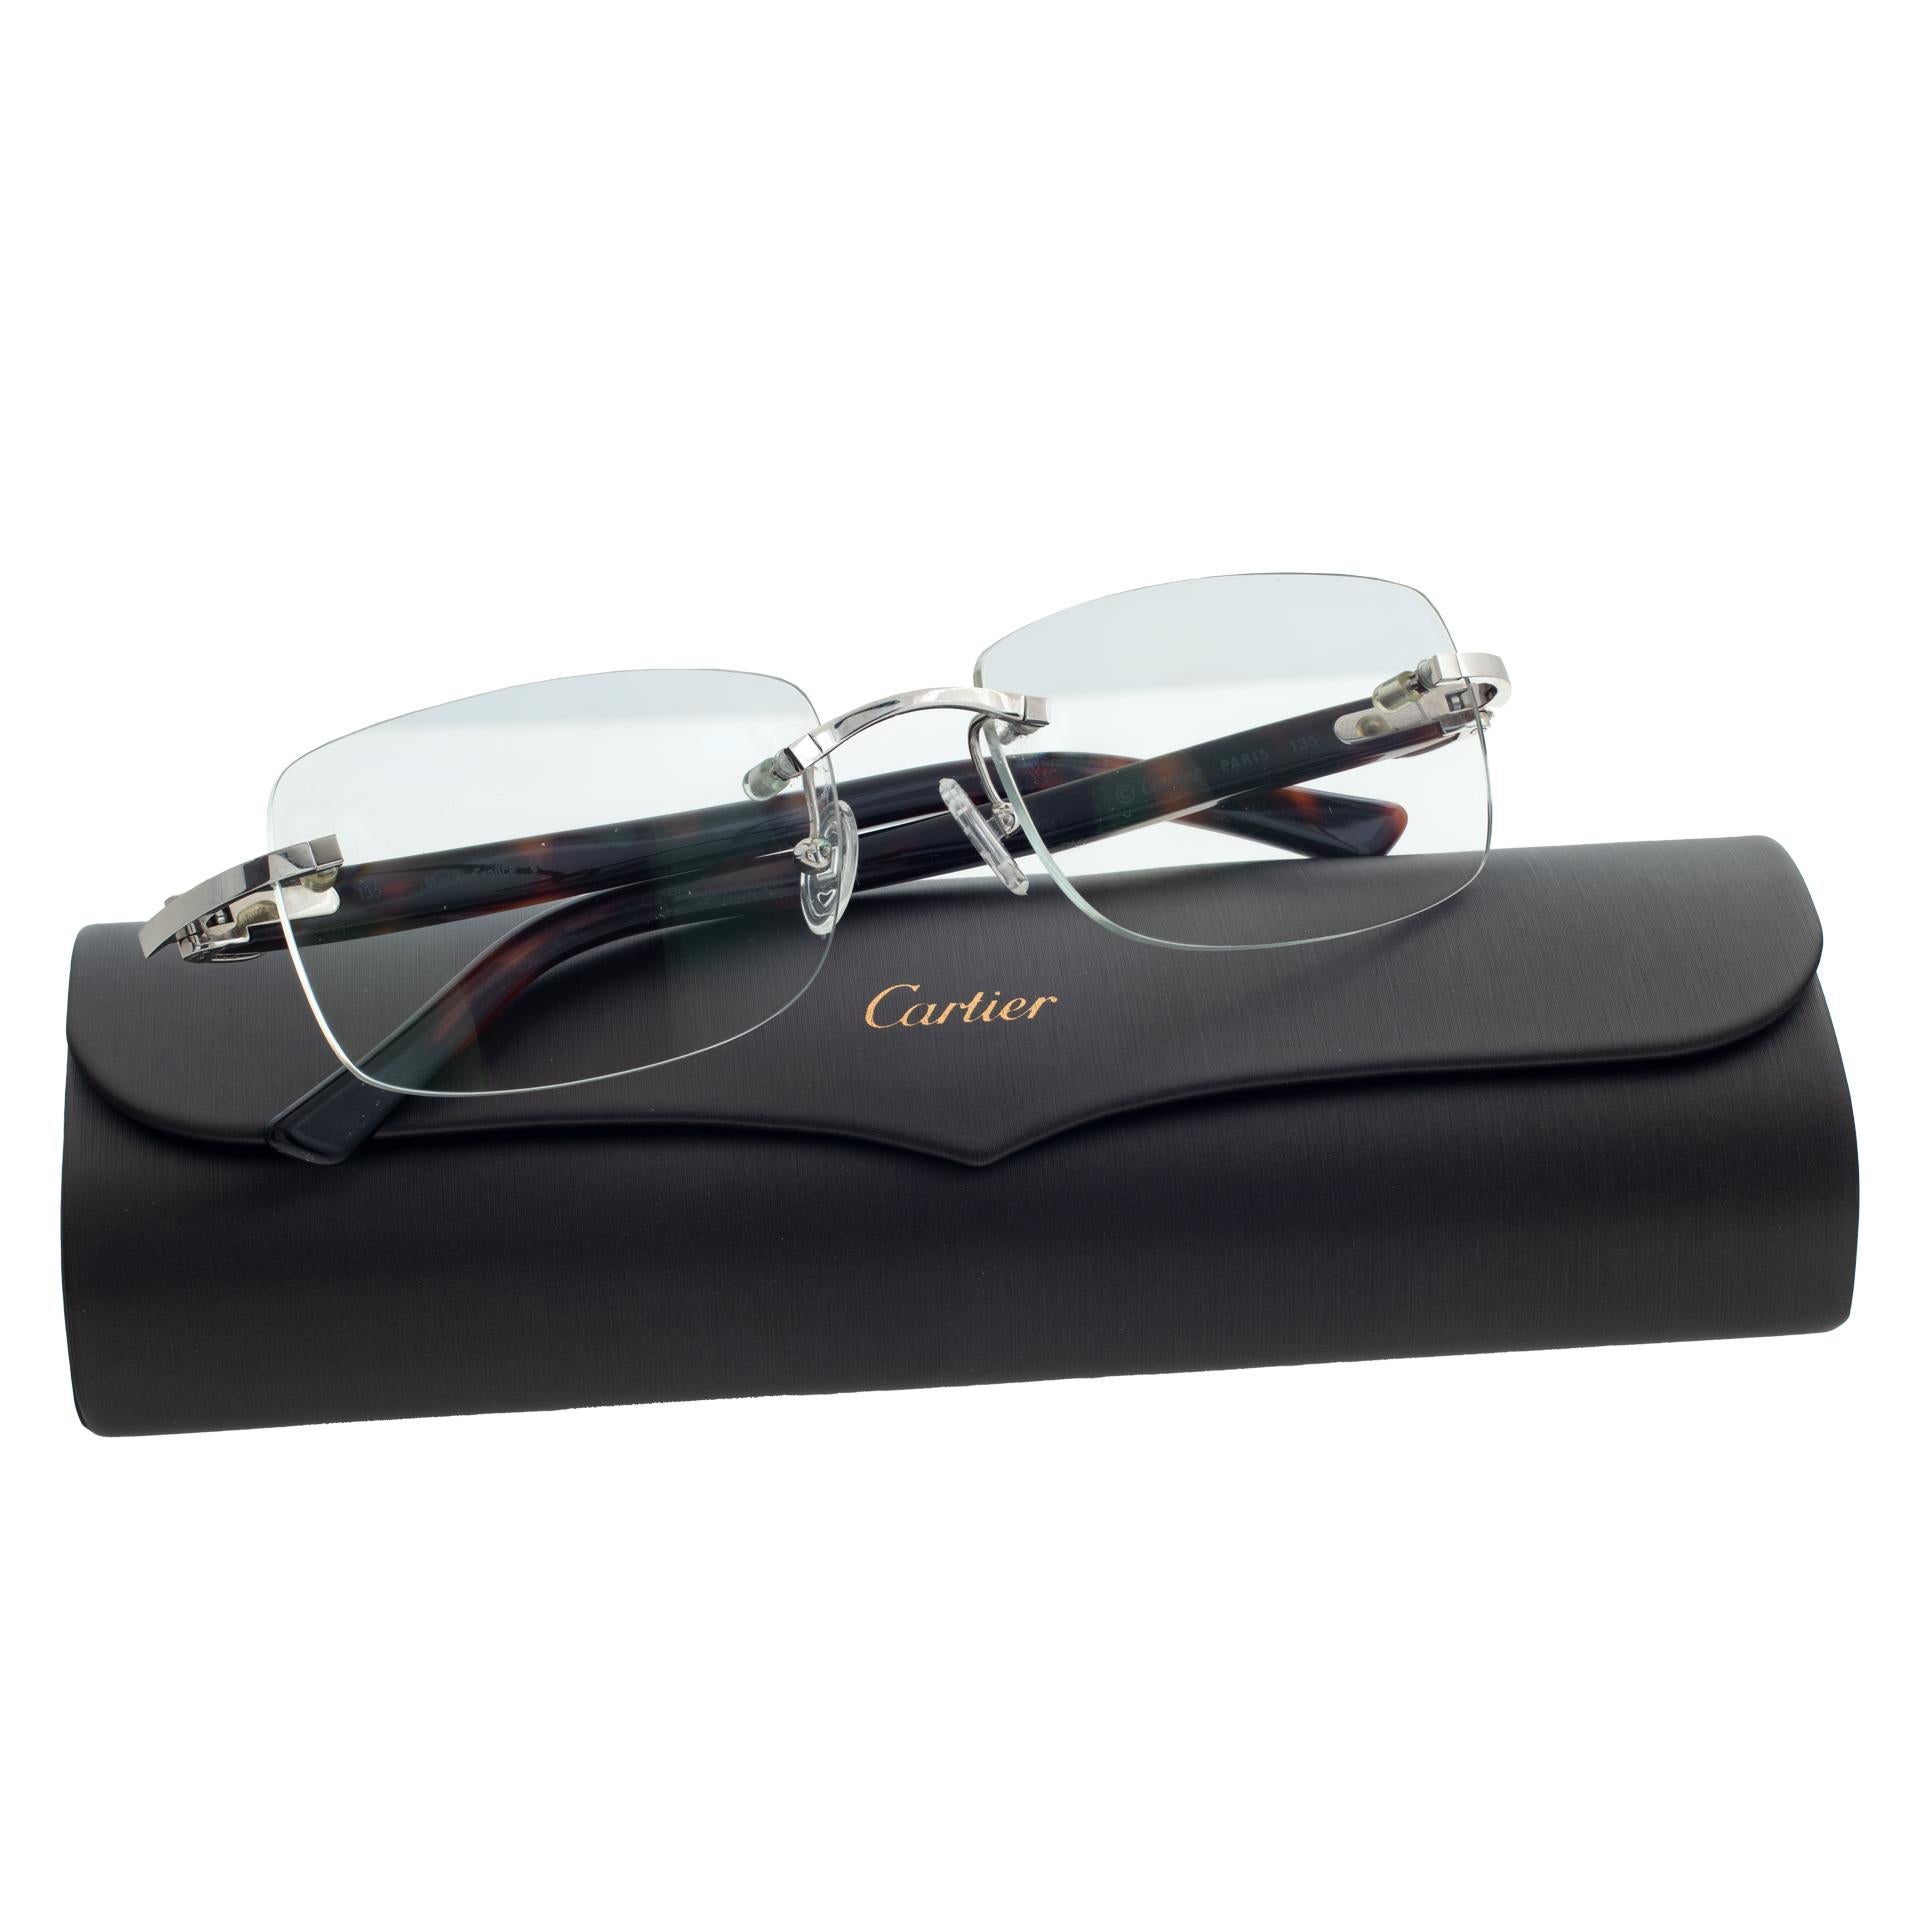 Cartier rimless eyeglasses with tortoise shell temples. Lens width 54mm, Bridge 16mm, Temple length 135mm. Comes with original box and booklet.
